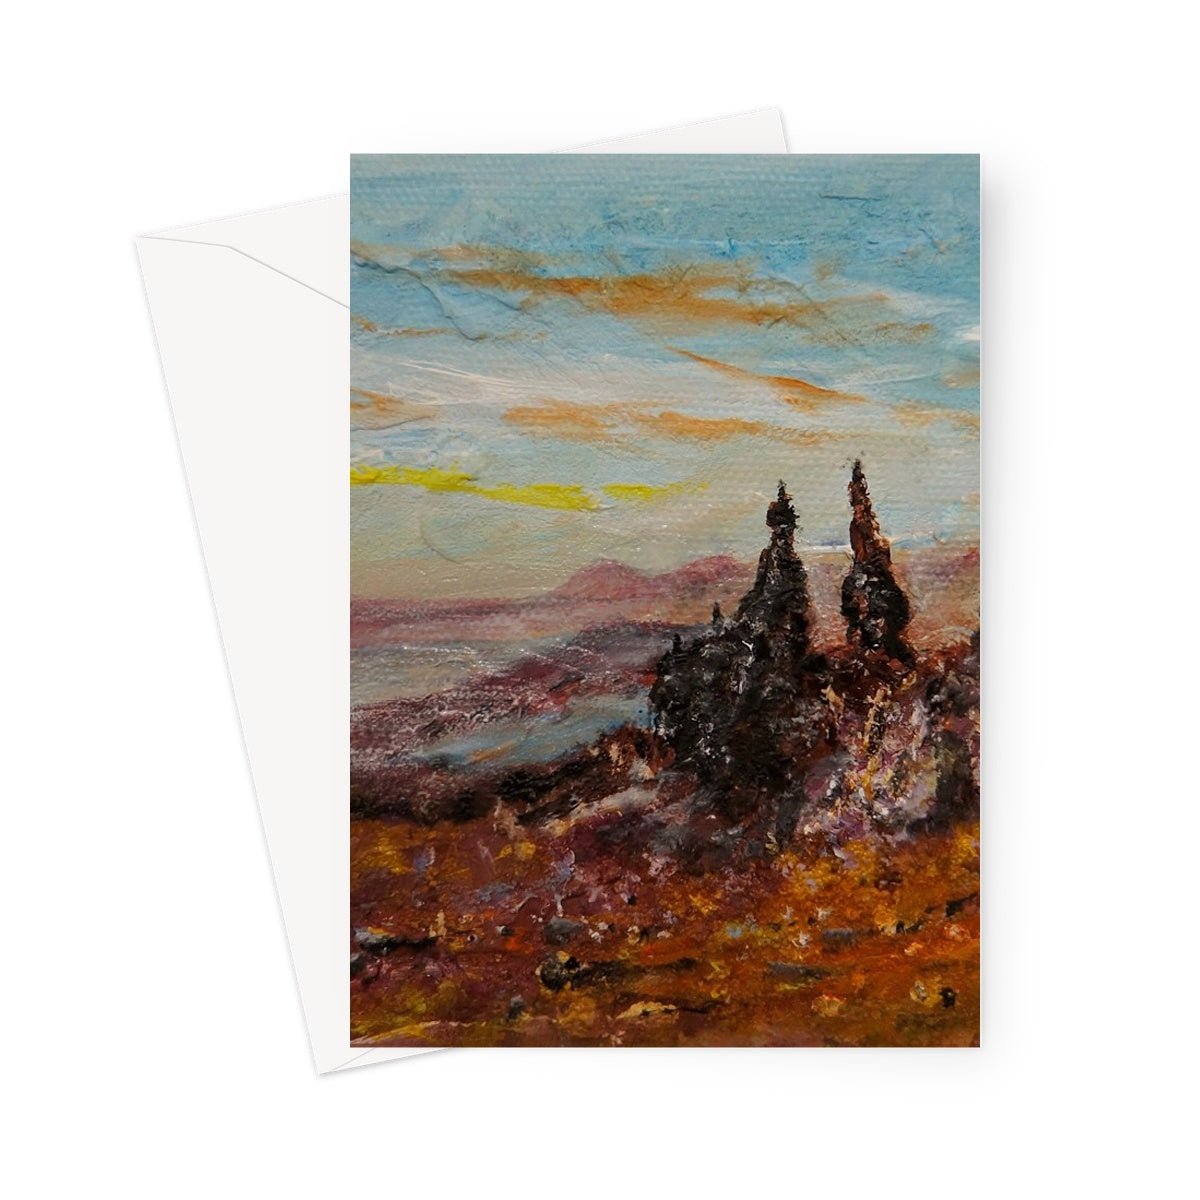 The Old Man Of Storr Skye Art Gifts Greeting Card-Greetings Cards-Skye Art Gallery-5"x7"-10 Cards-Paintings, Prints, Homeware, Art Gifts From Scotland By Scottish Artist Kevin Hunter